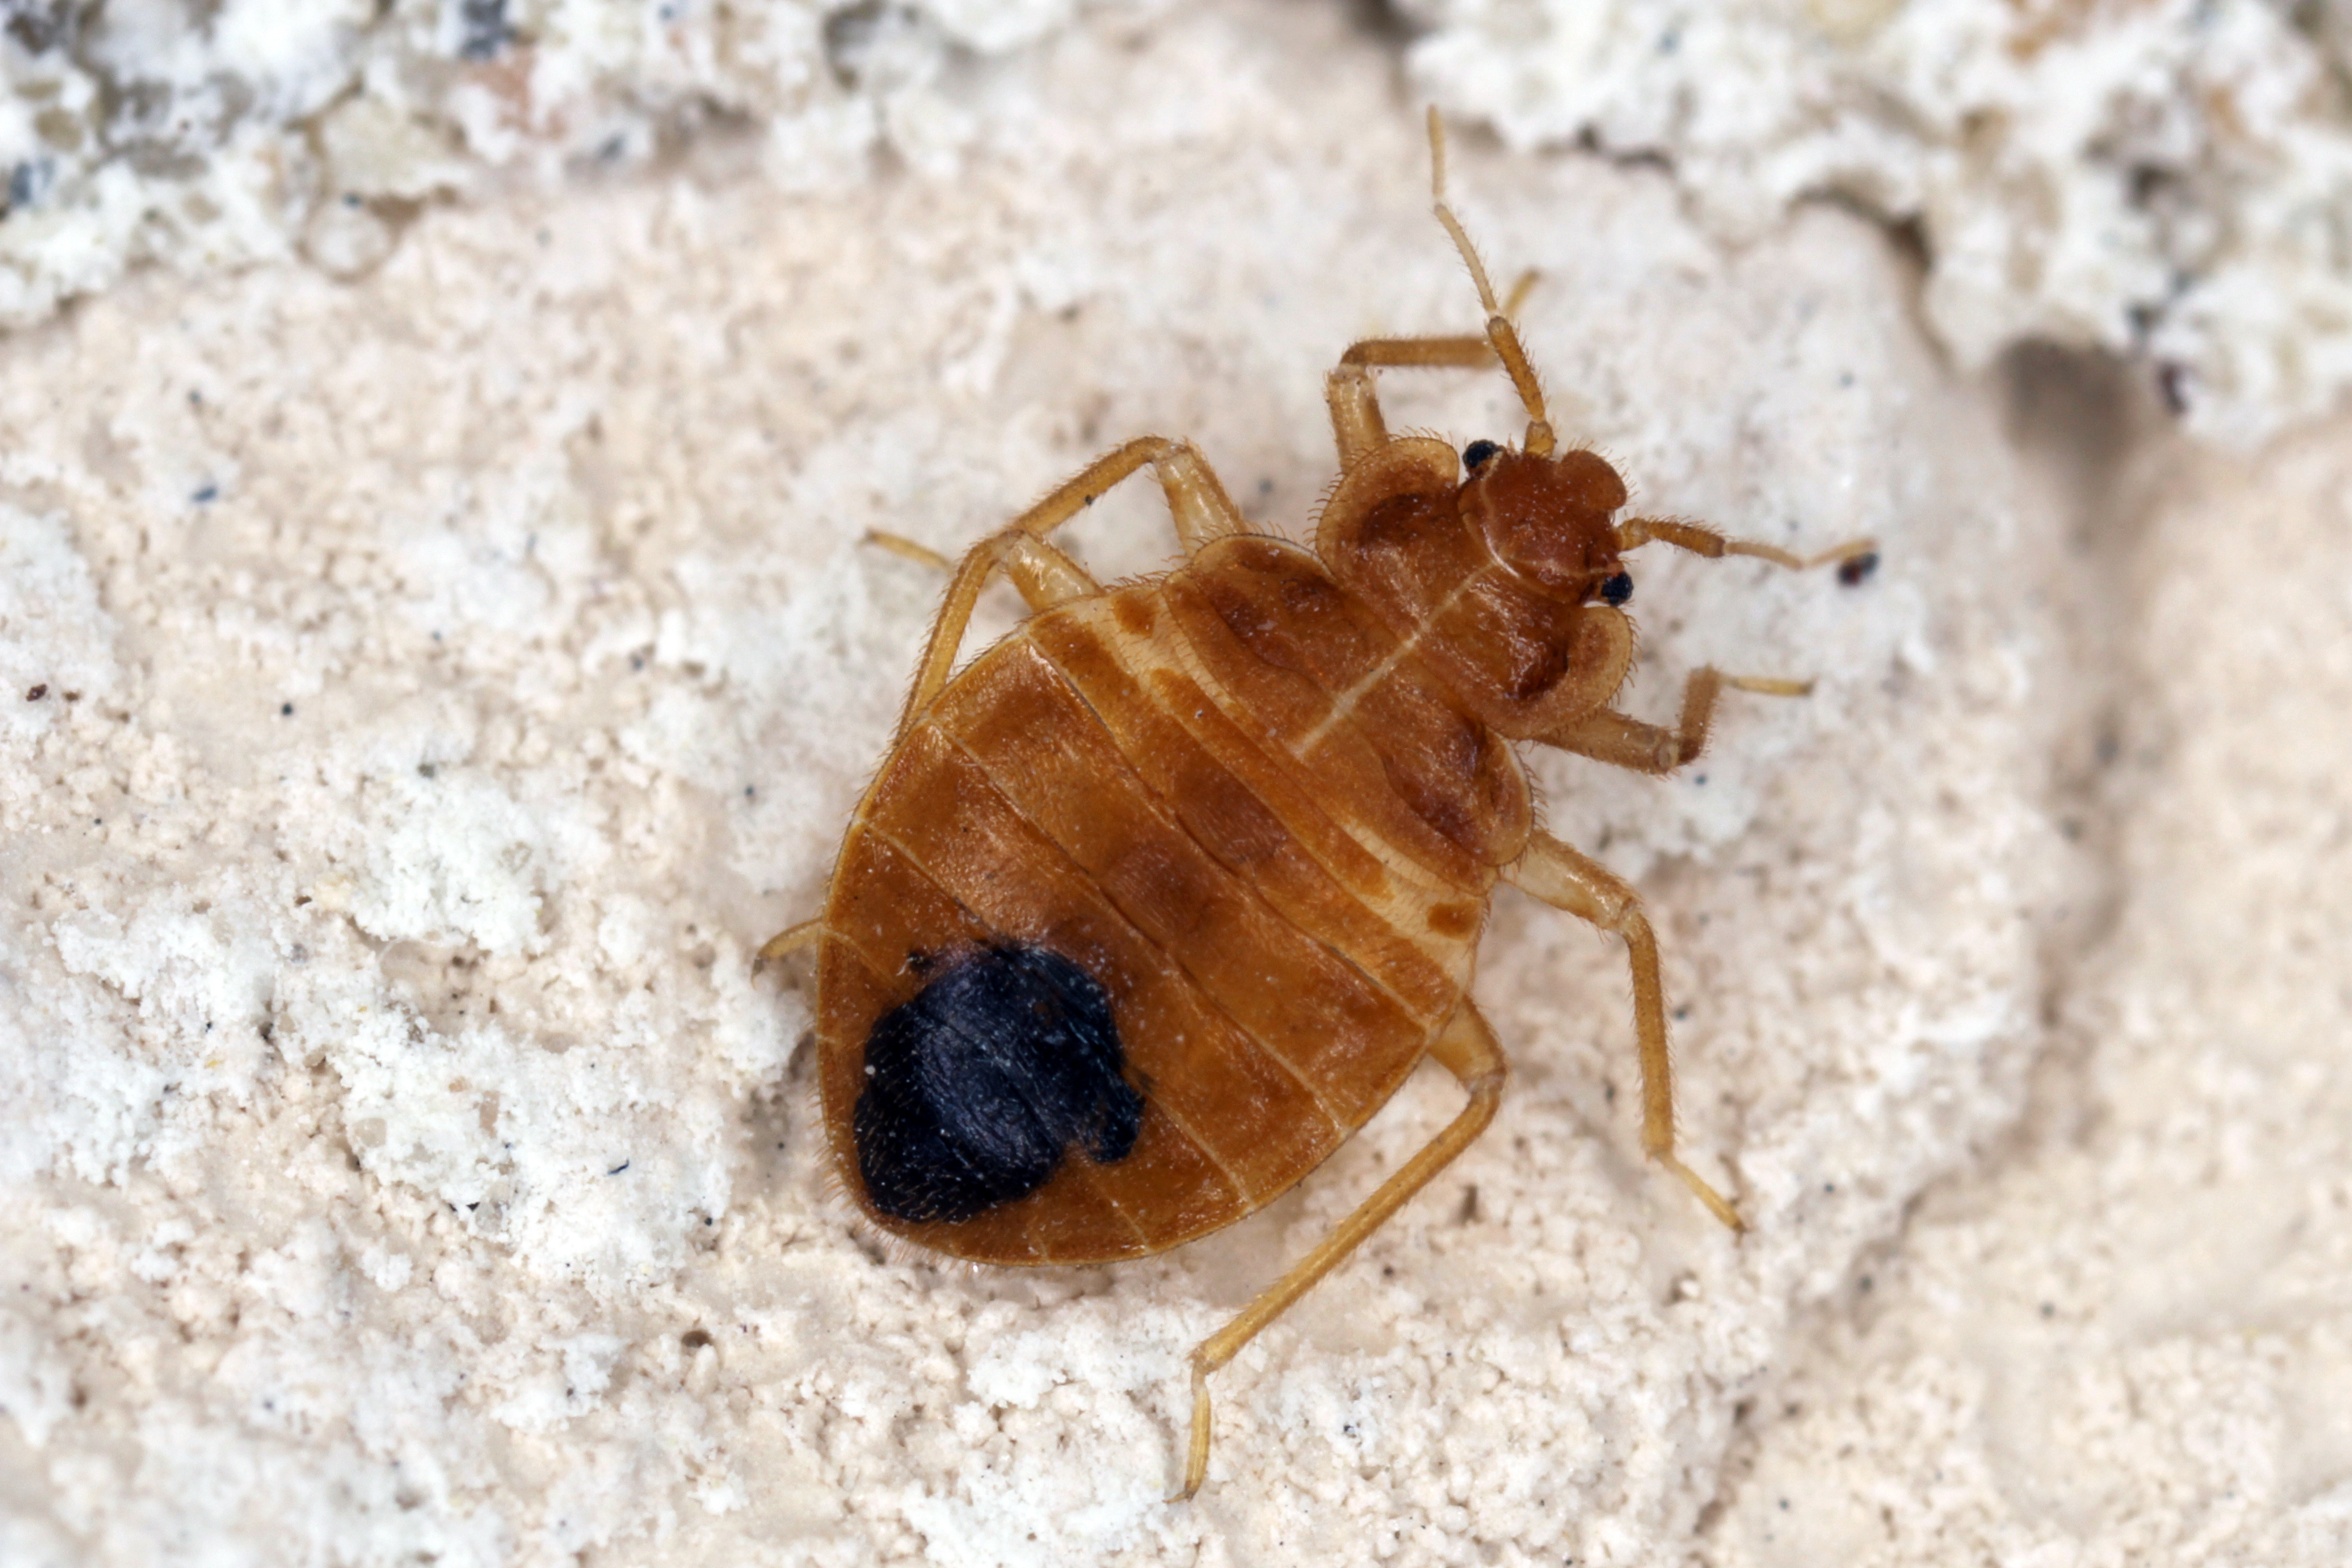 A close up shot of a bed bug - experience the best bed bug control in Waco, TX with GGA Pest Management.